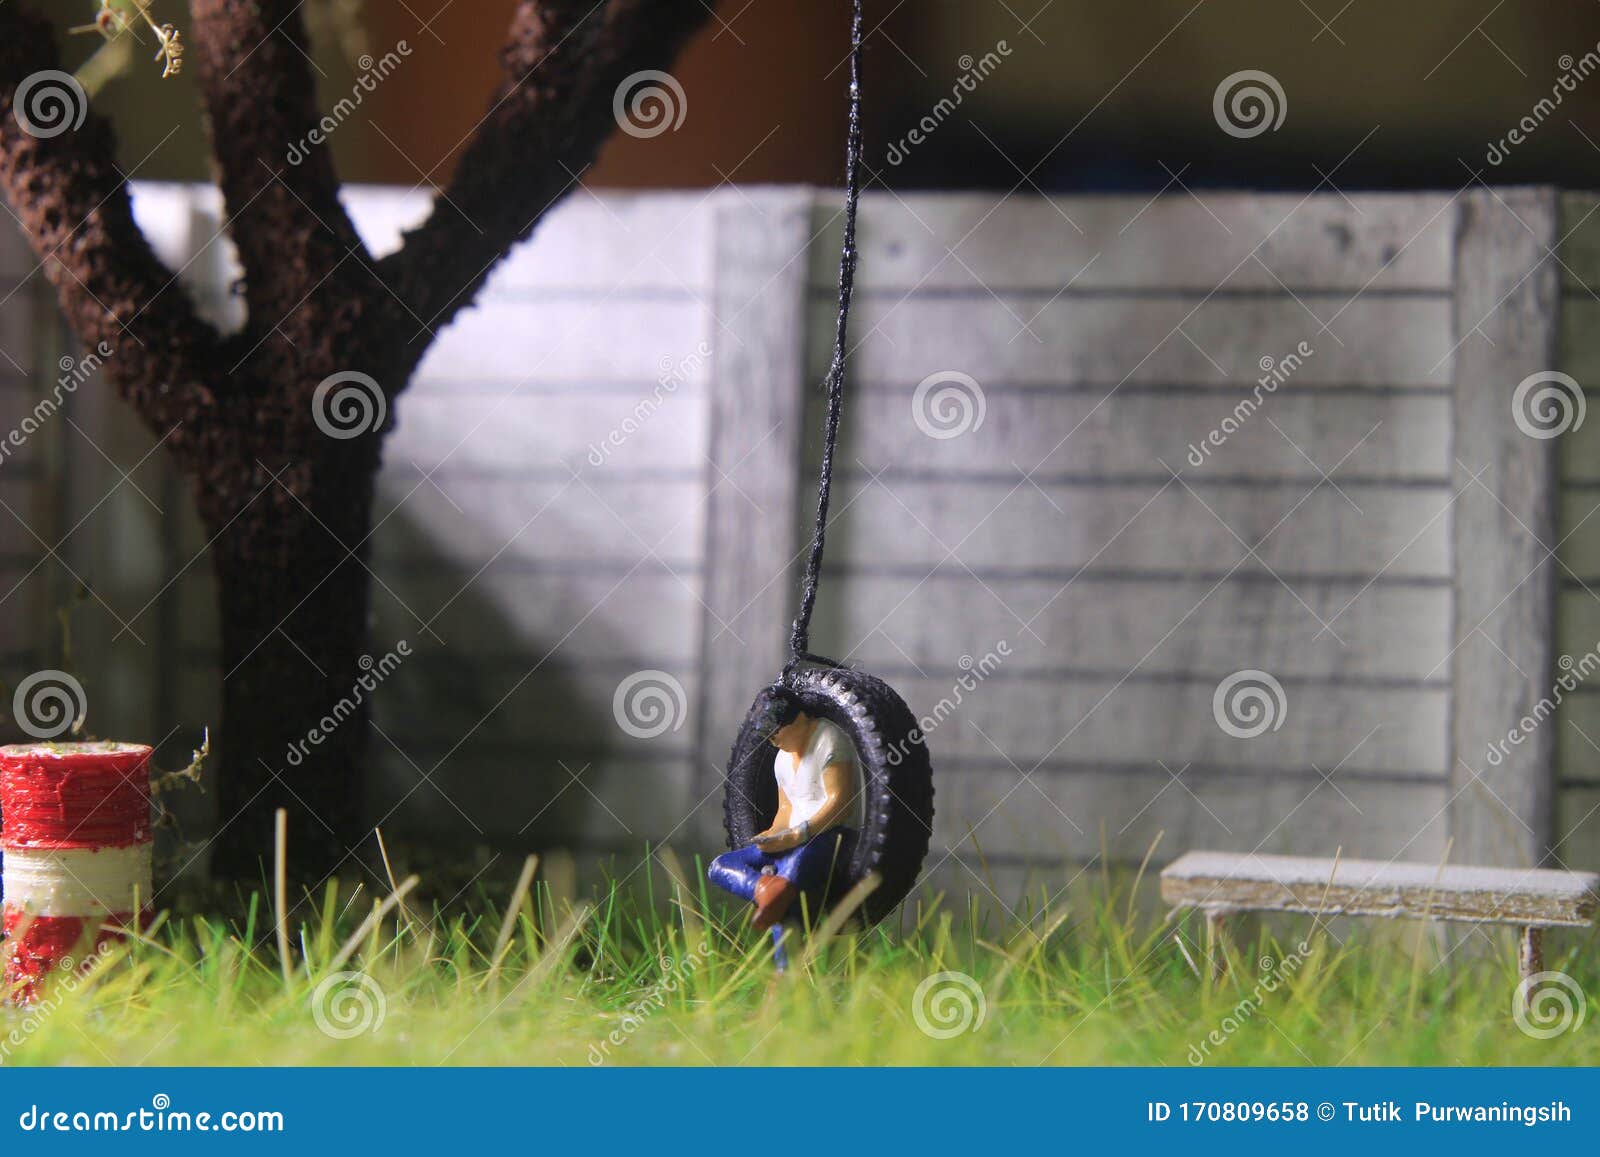 Illustration Photo, Gadget Freak or Addicted, Sitting Man Holding  Smartphone at Swinging from Used Car Tire in the Yard Stock Photo - Image  of mini, figurine: 170809658